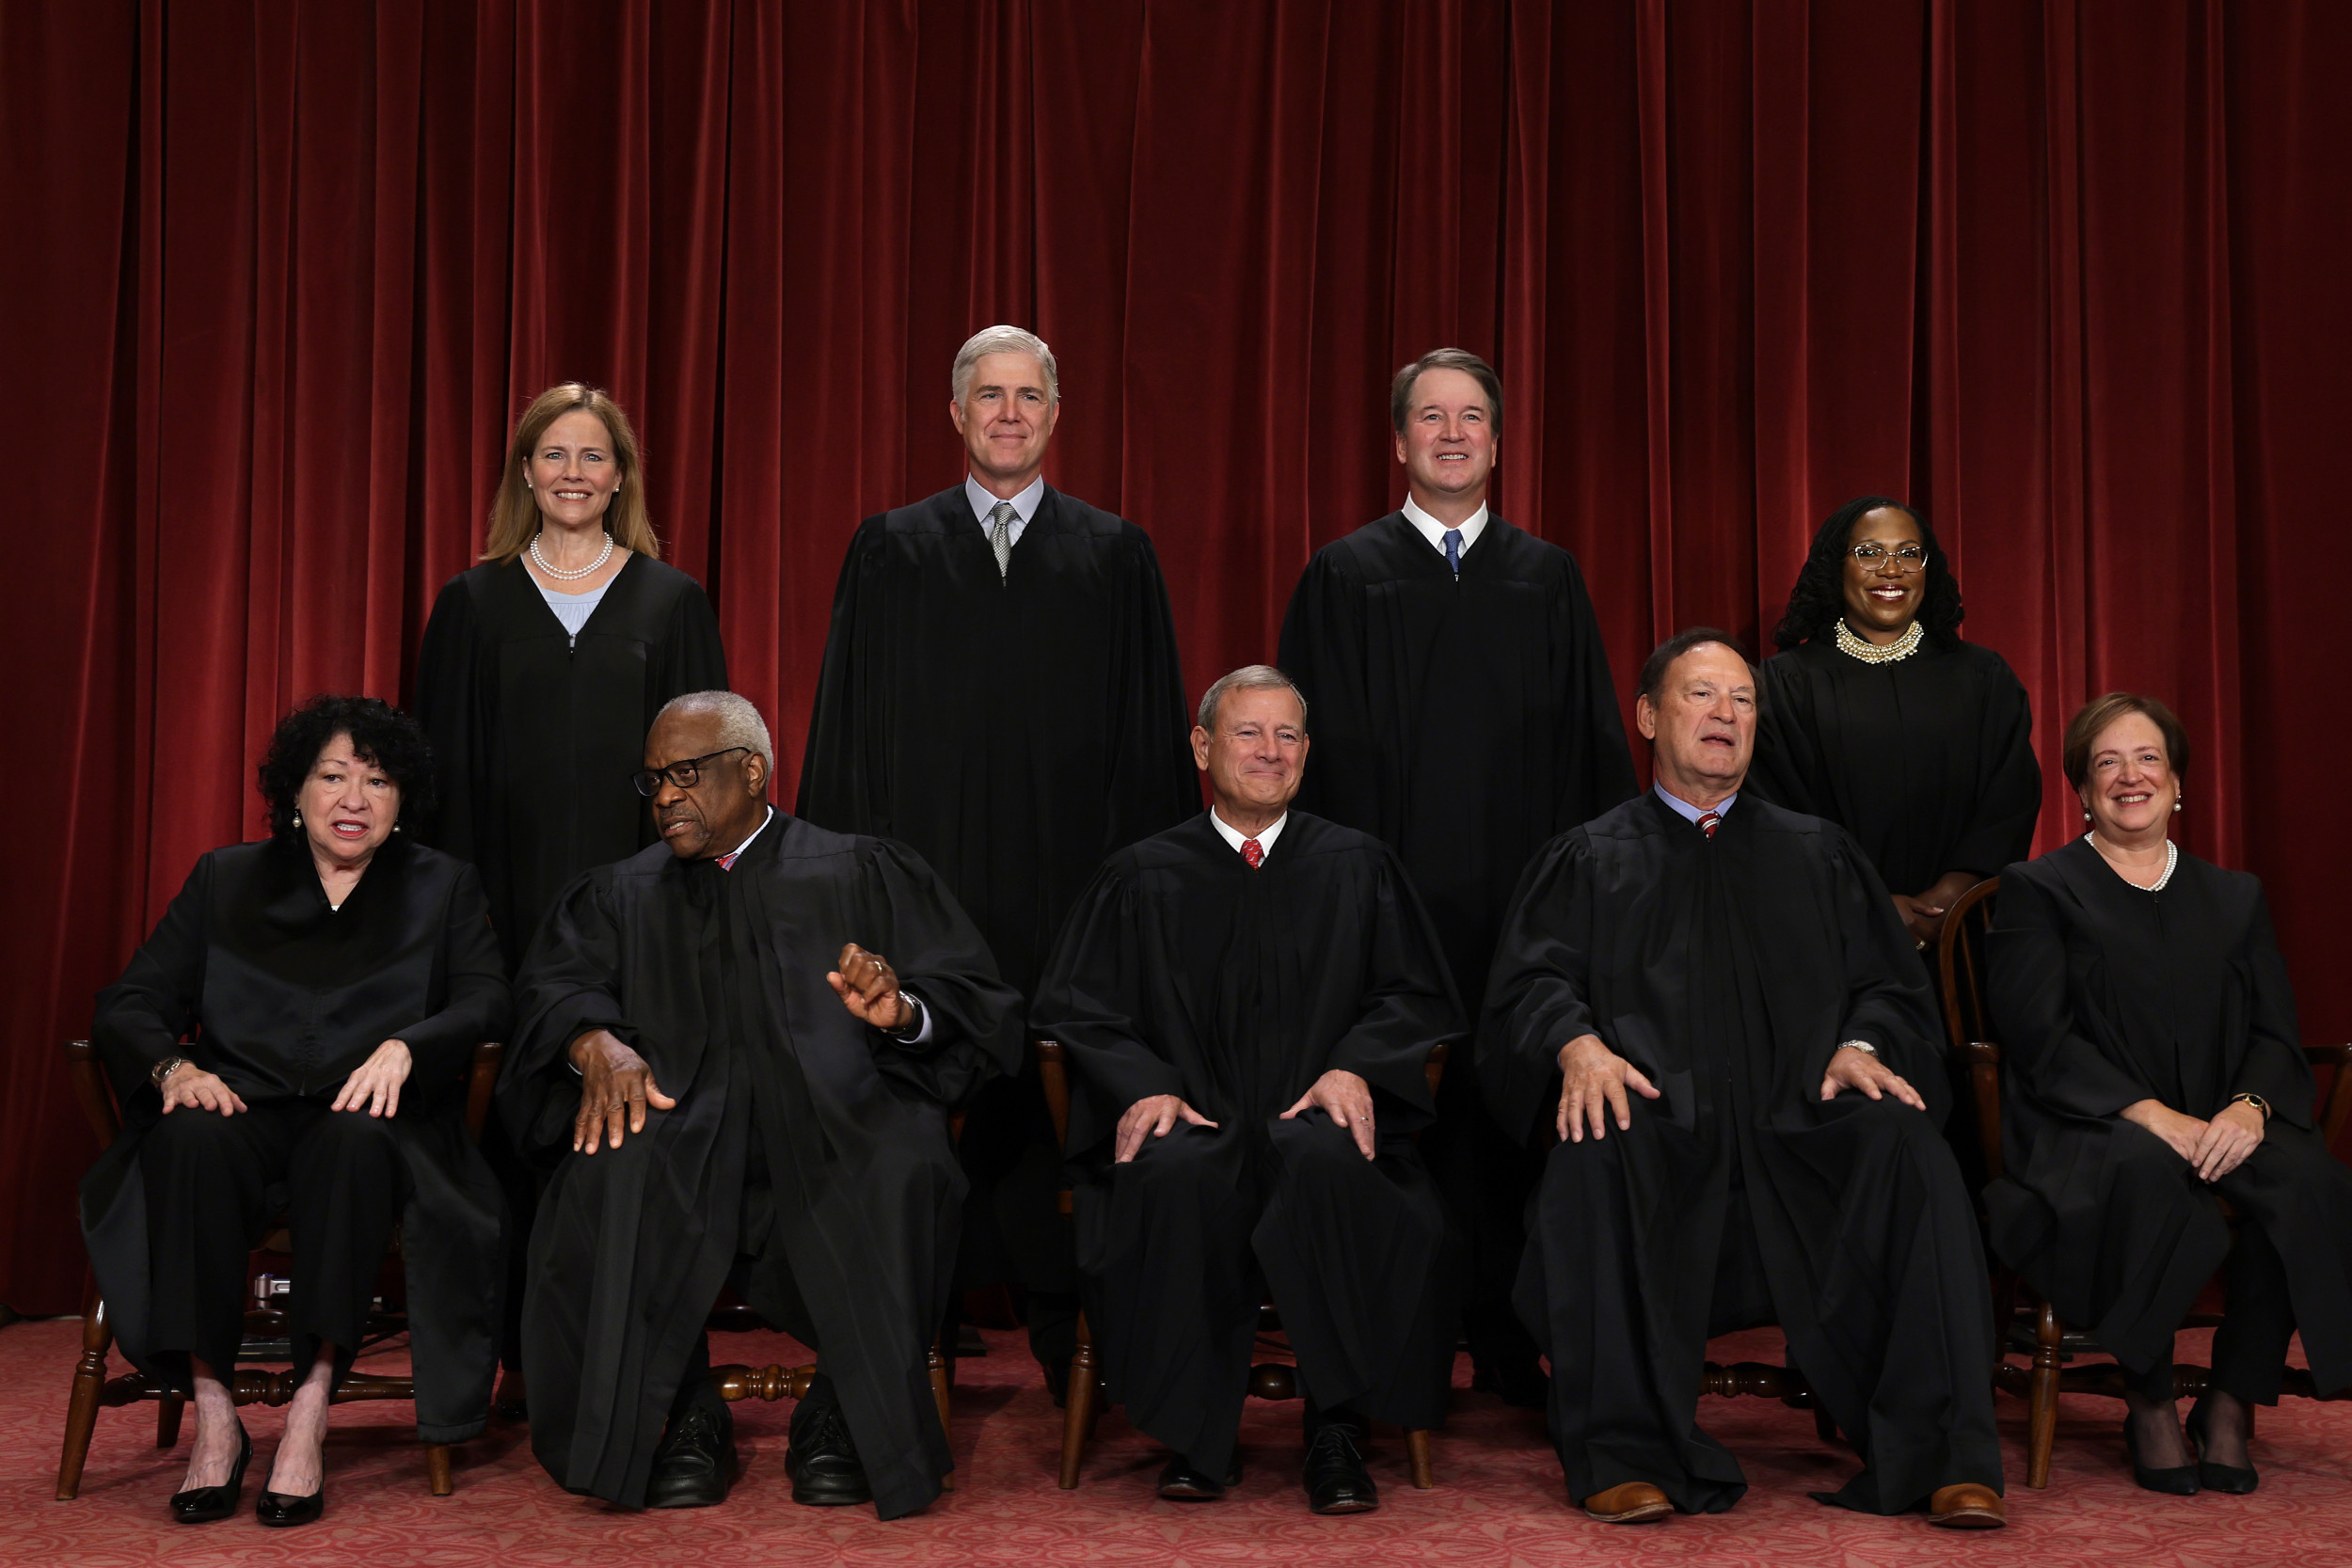 The Supreme Court’s Proven Itself Illegitimate—a Rubber Stamp on Extremism